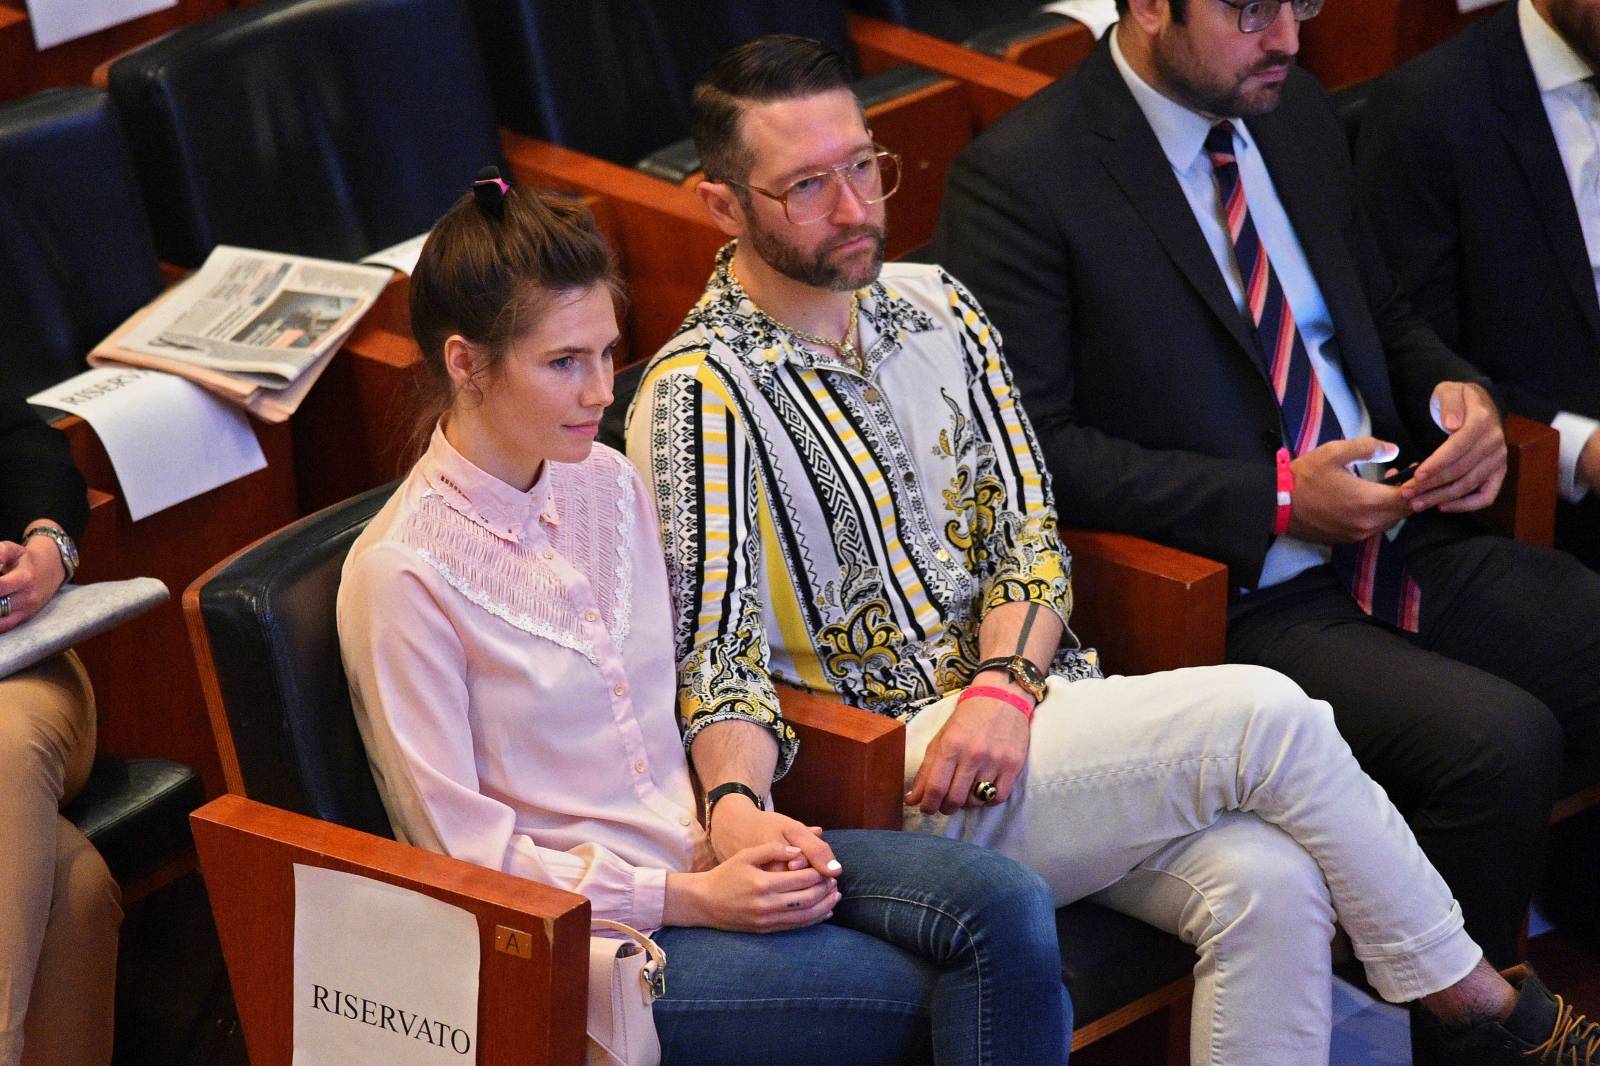 Amanda Knox attends the first day of the Criminal Justice Festival in Modena